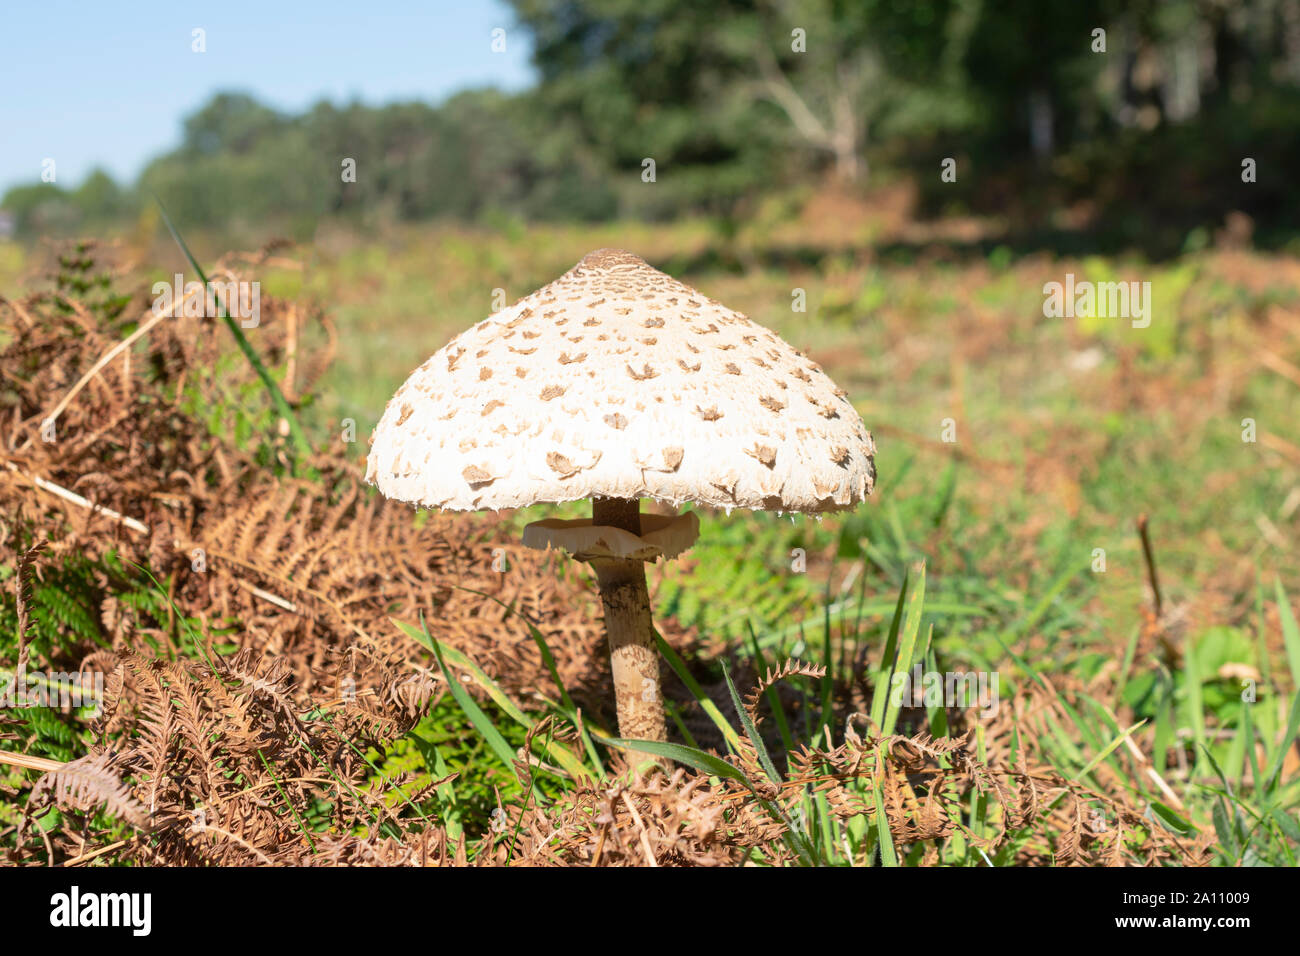 amanita, mushroom with large dots in a field with a blurred background Stock Photo